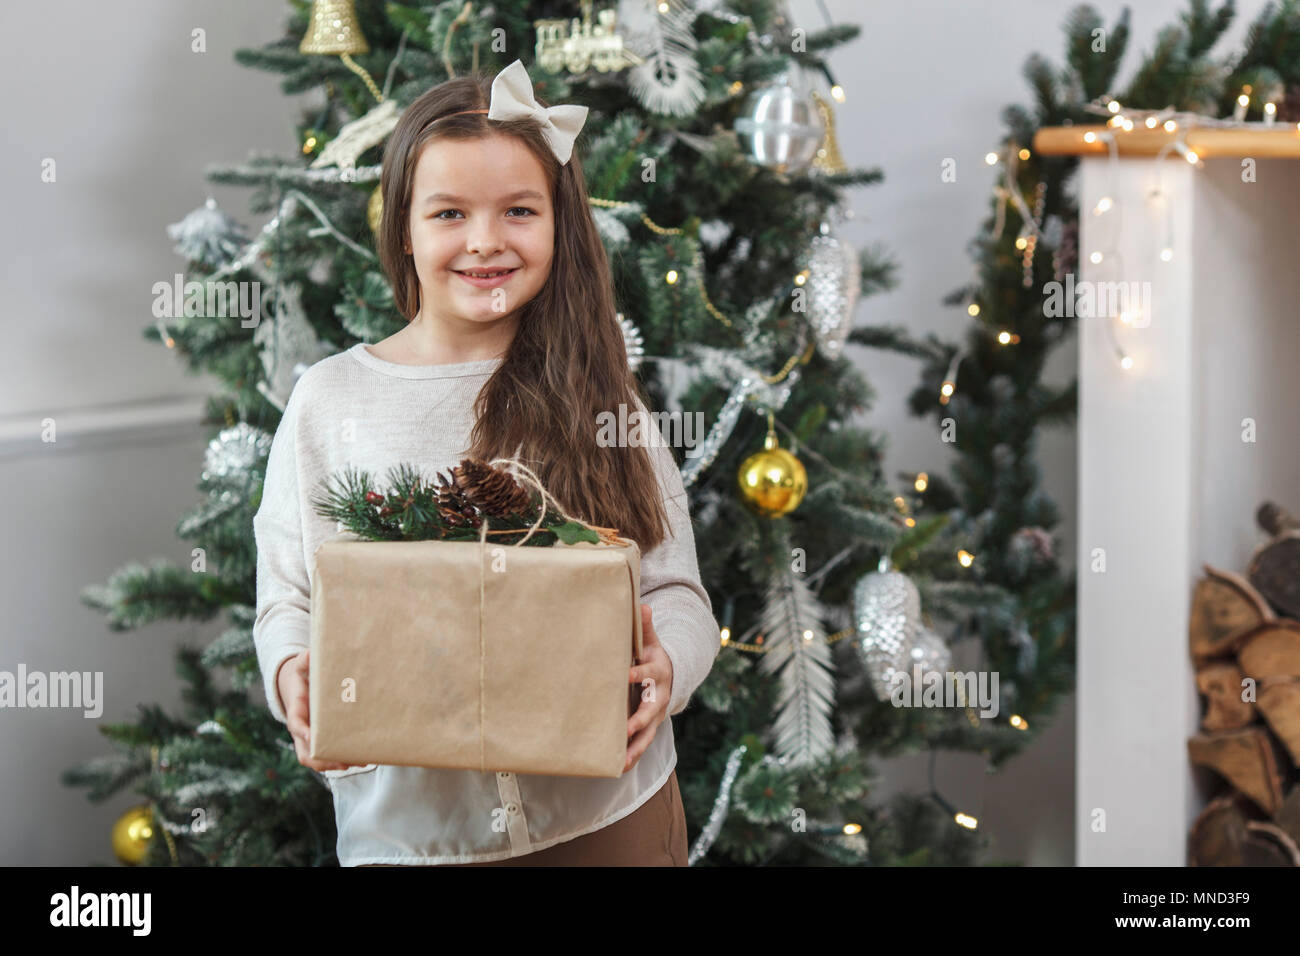 Portrait of smiling girl holding gift against Christmas tree at home Stock Photo